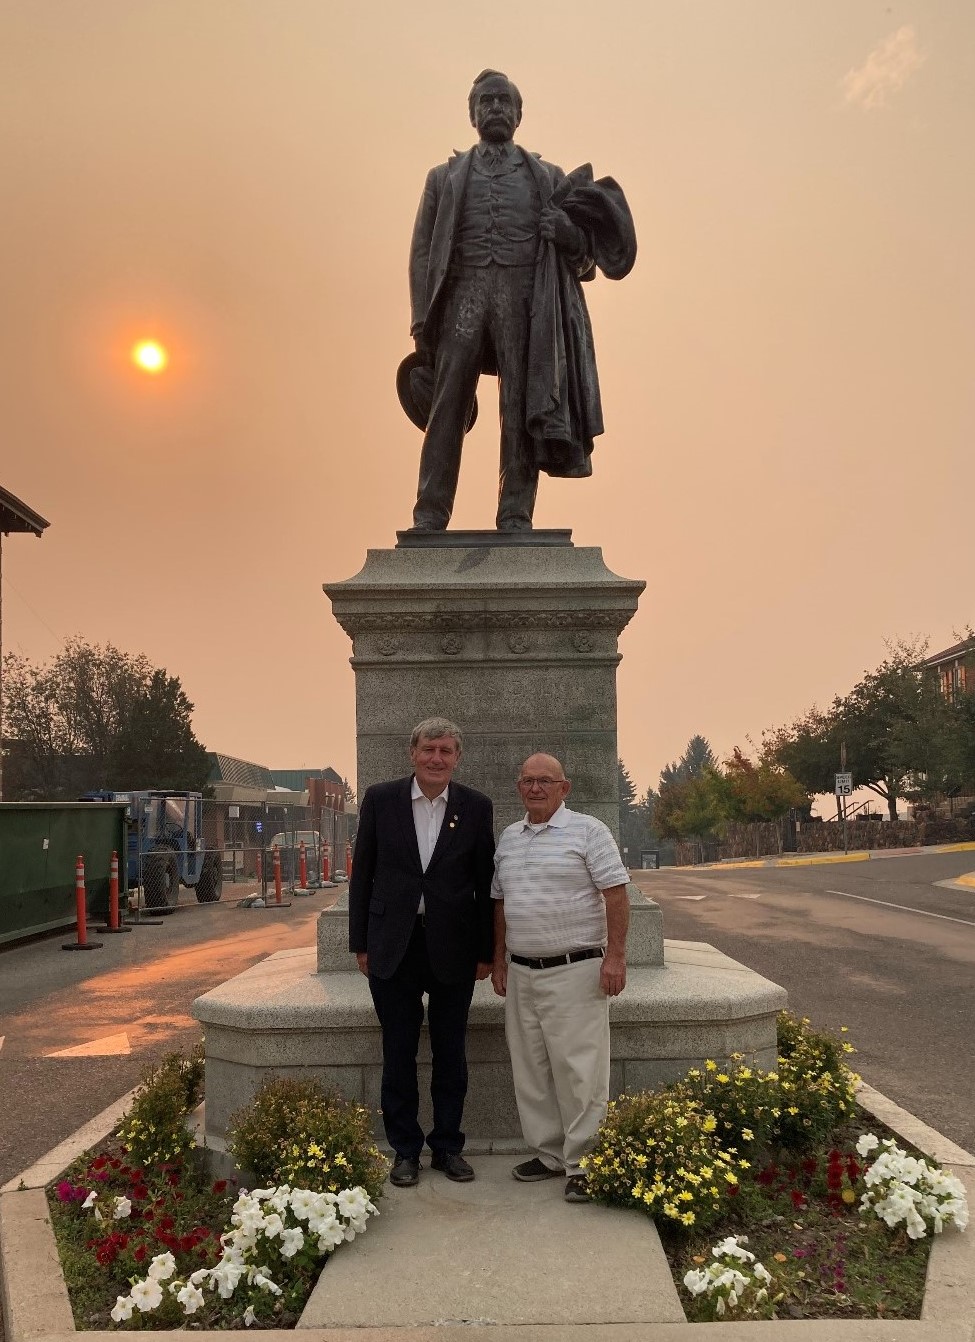 Ambassador Mulhall at the Marcus Daly Statue Montana